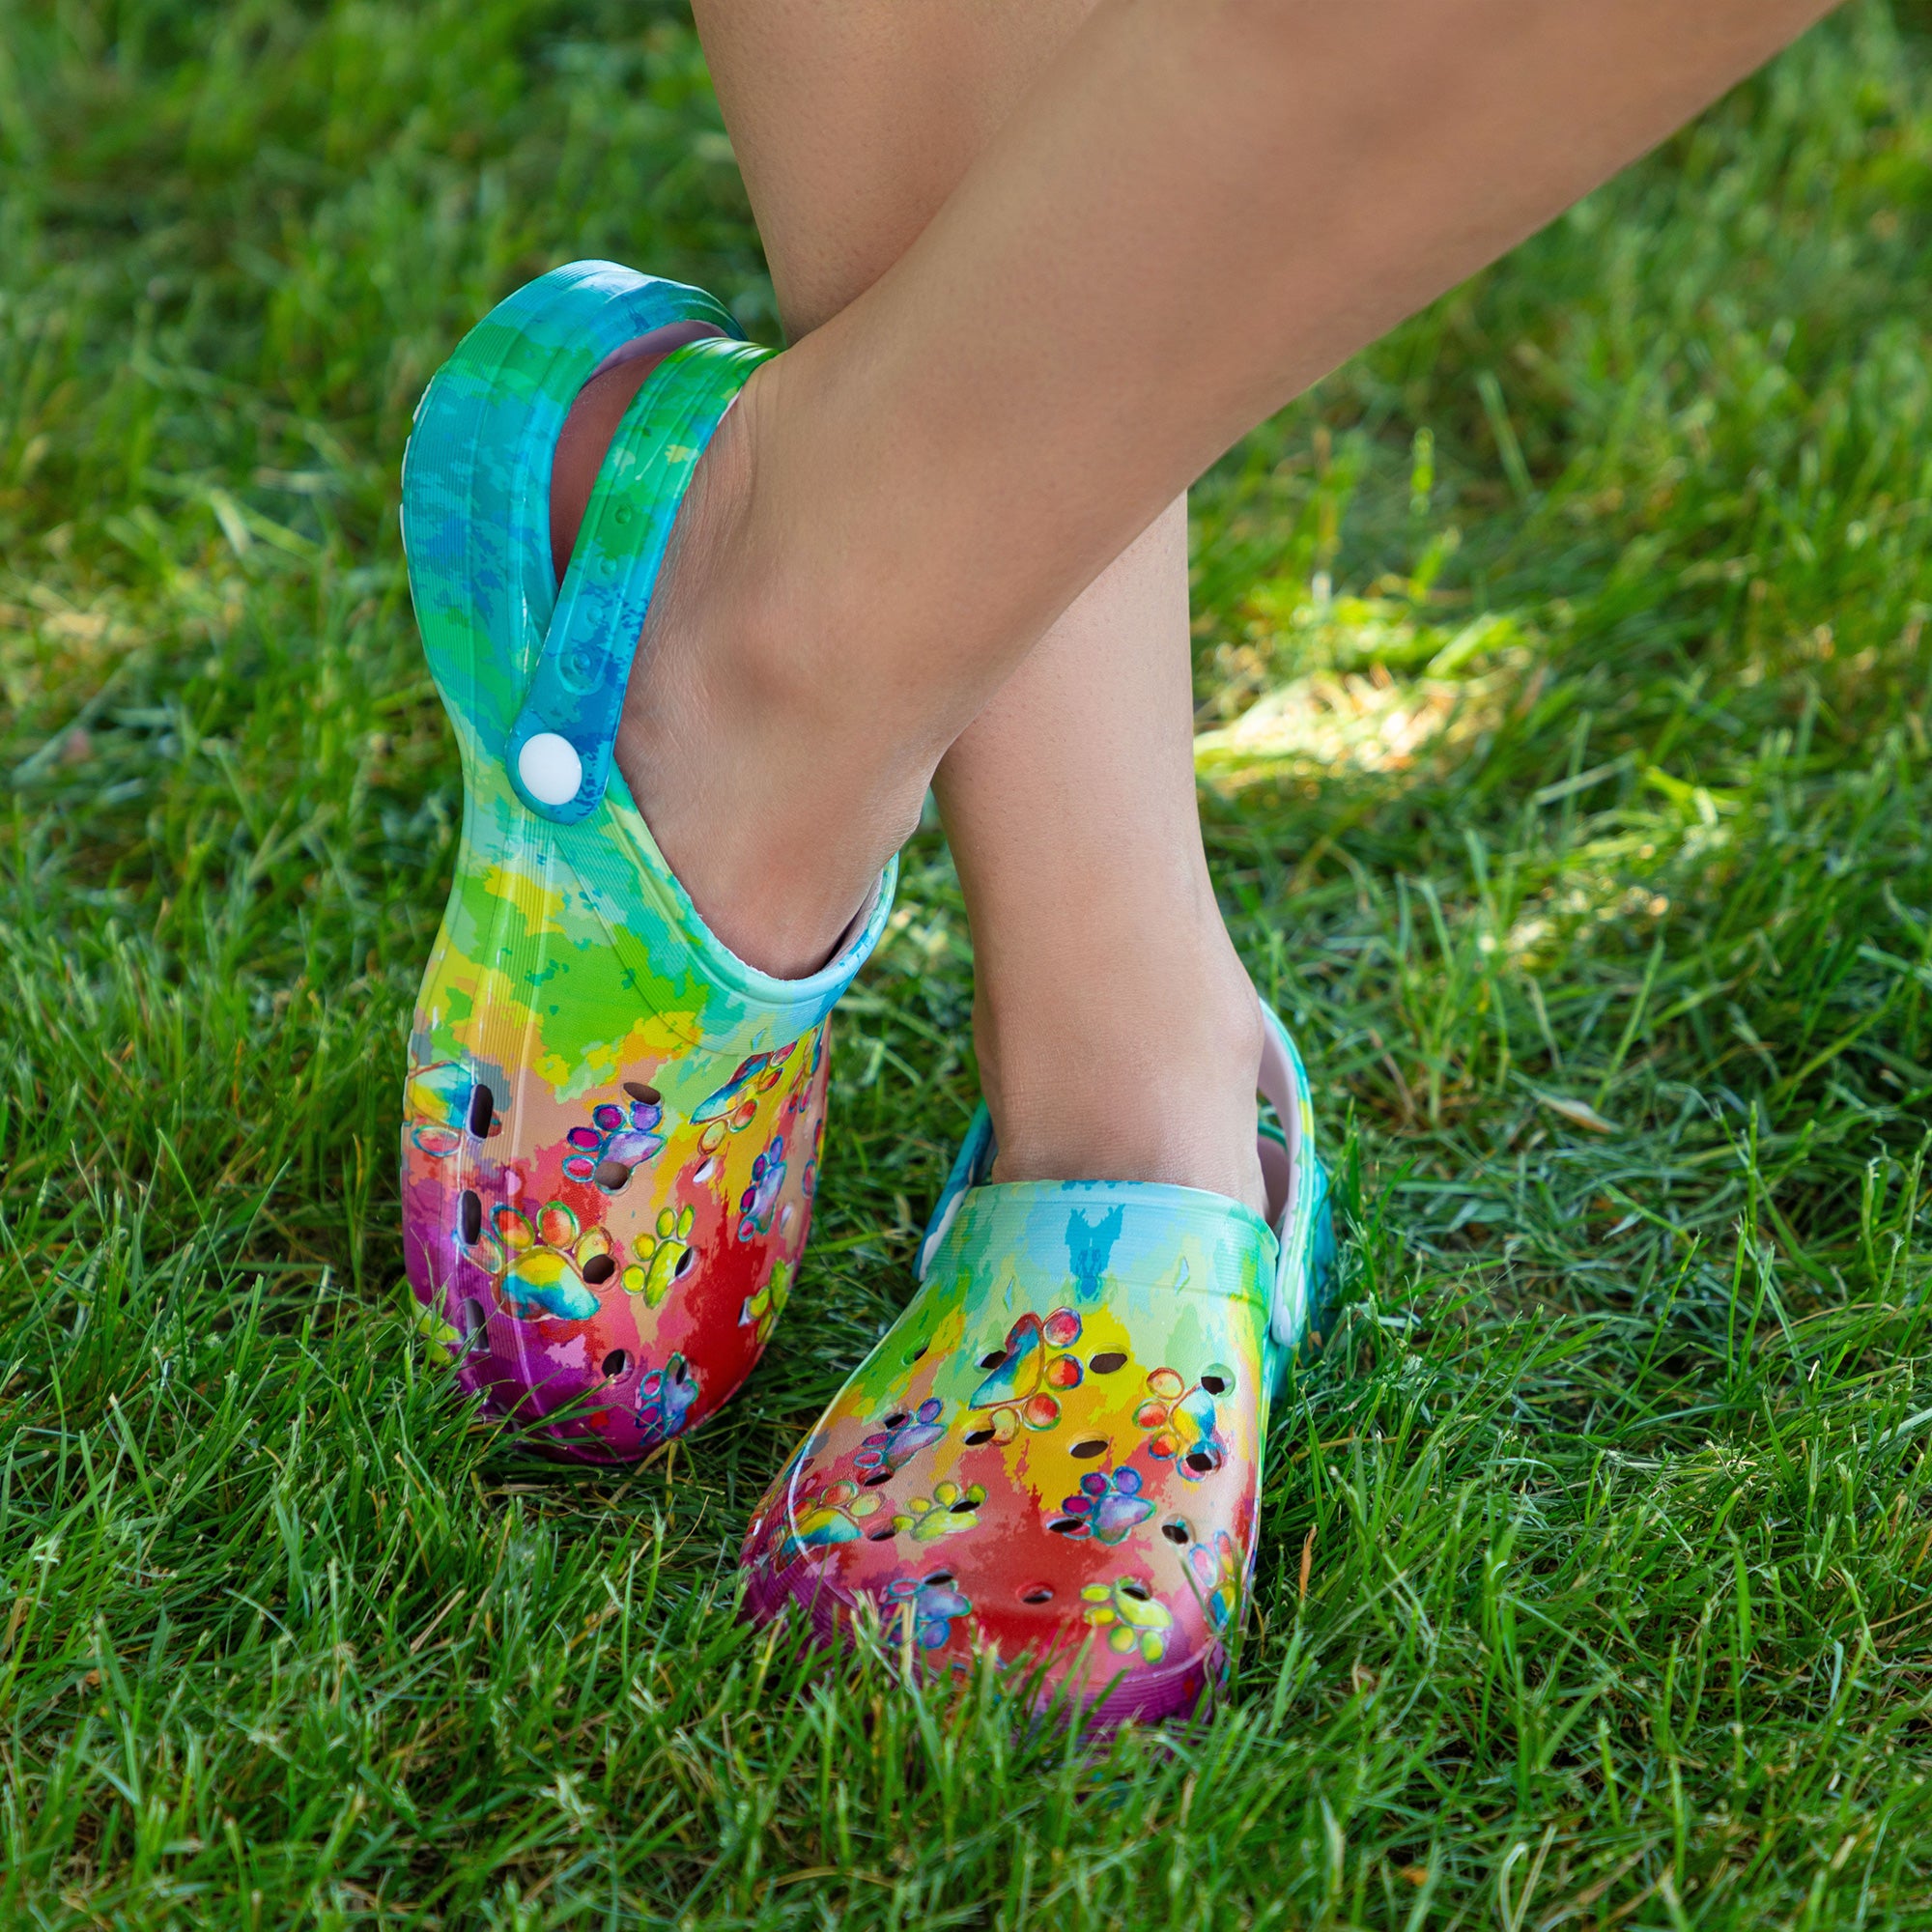 Super Comfy Paw Print Clogs - Rainbow Marble Paws - 6